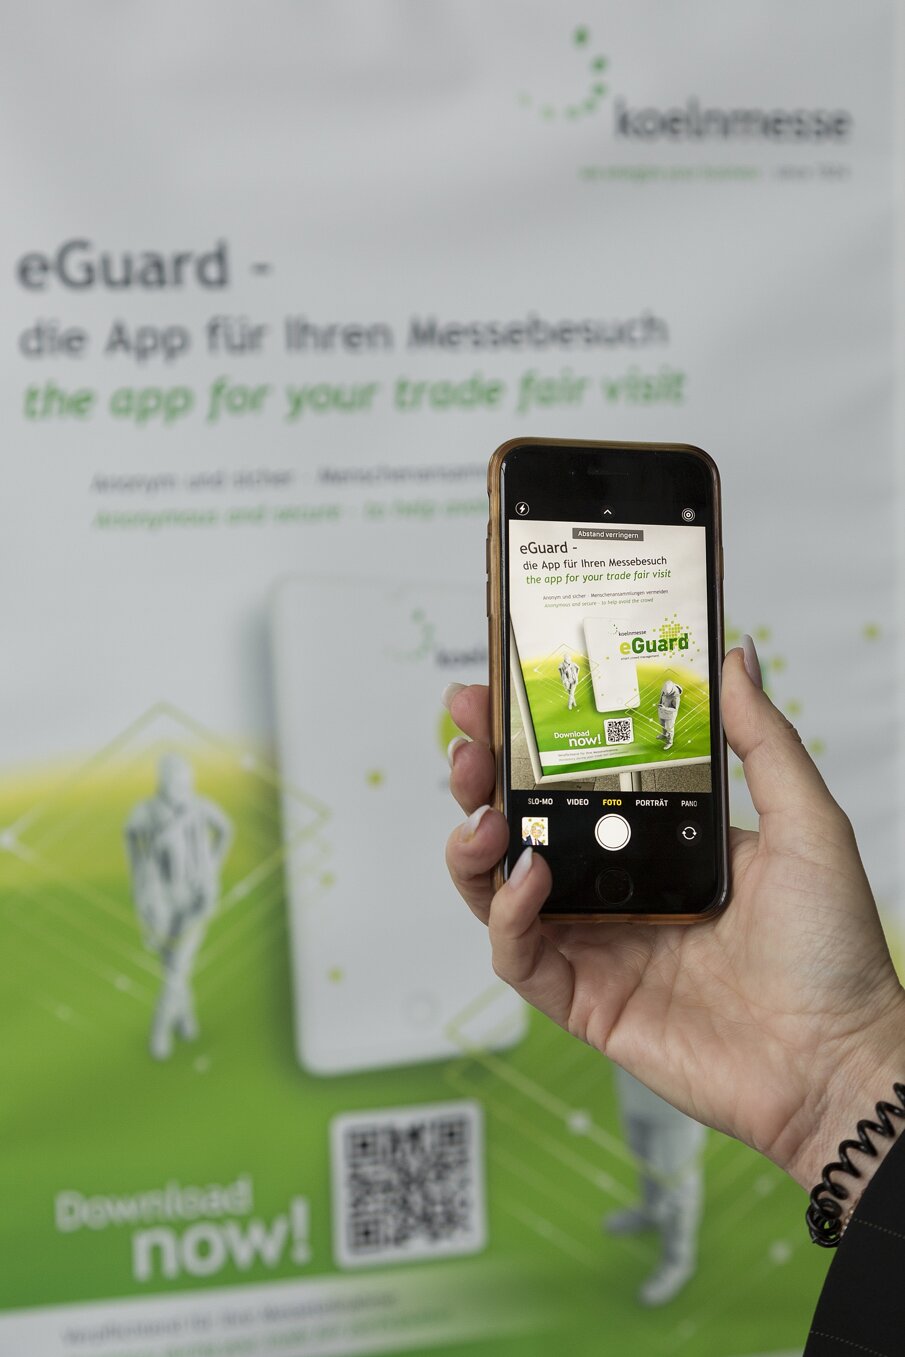 Visitors to IDS will need to install the eGuard mobile application. (Image: IDS Cologne)